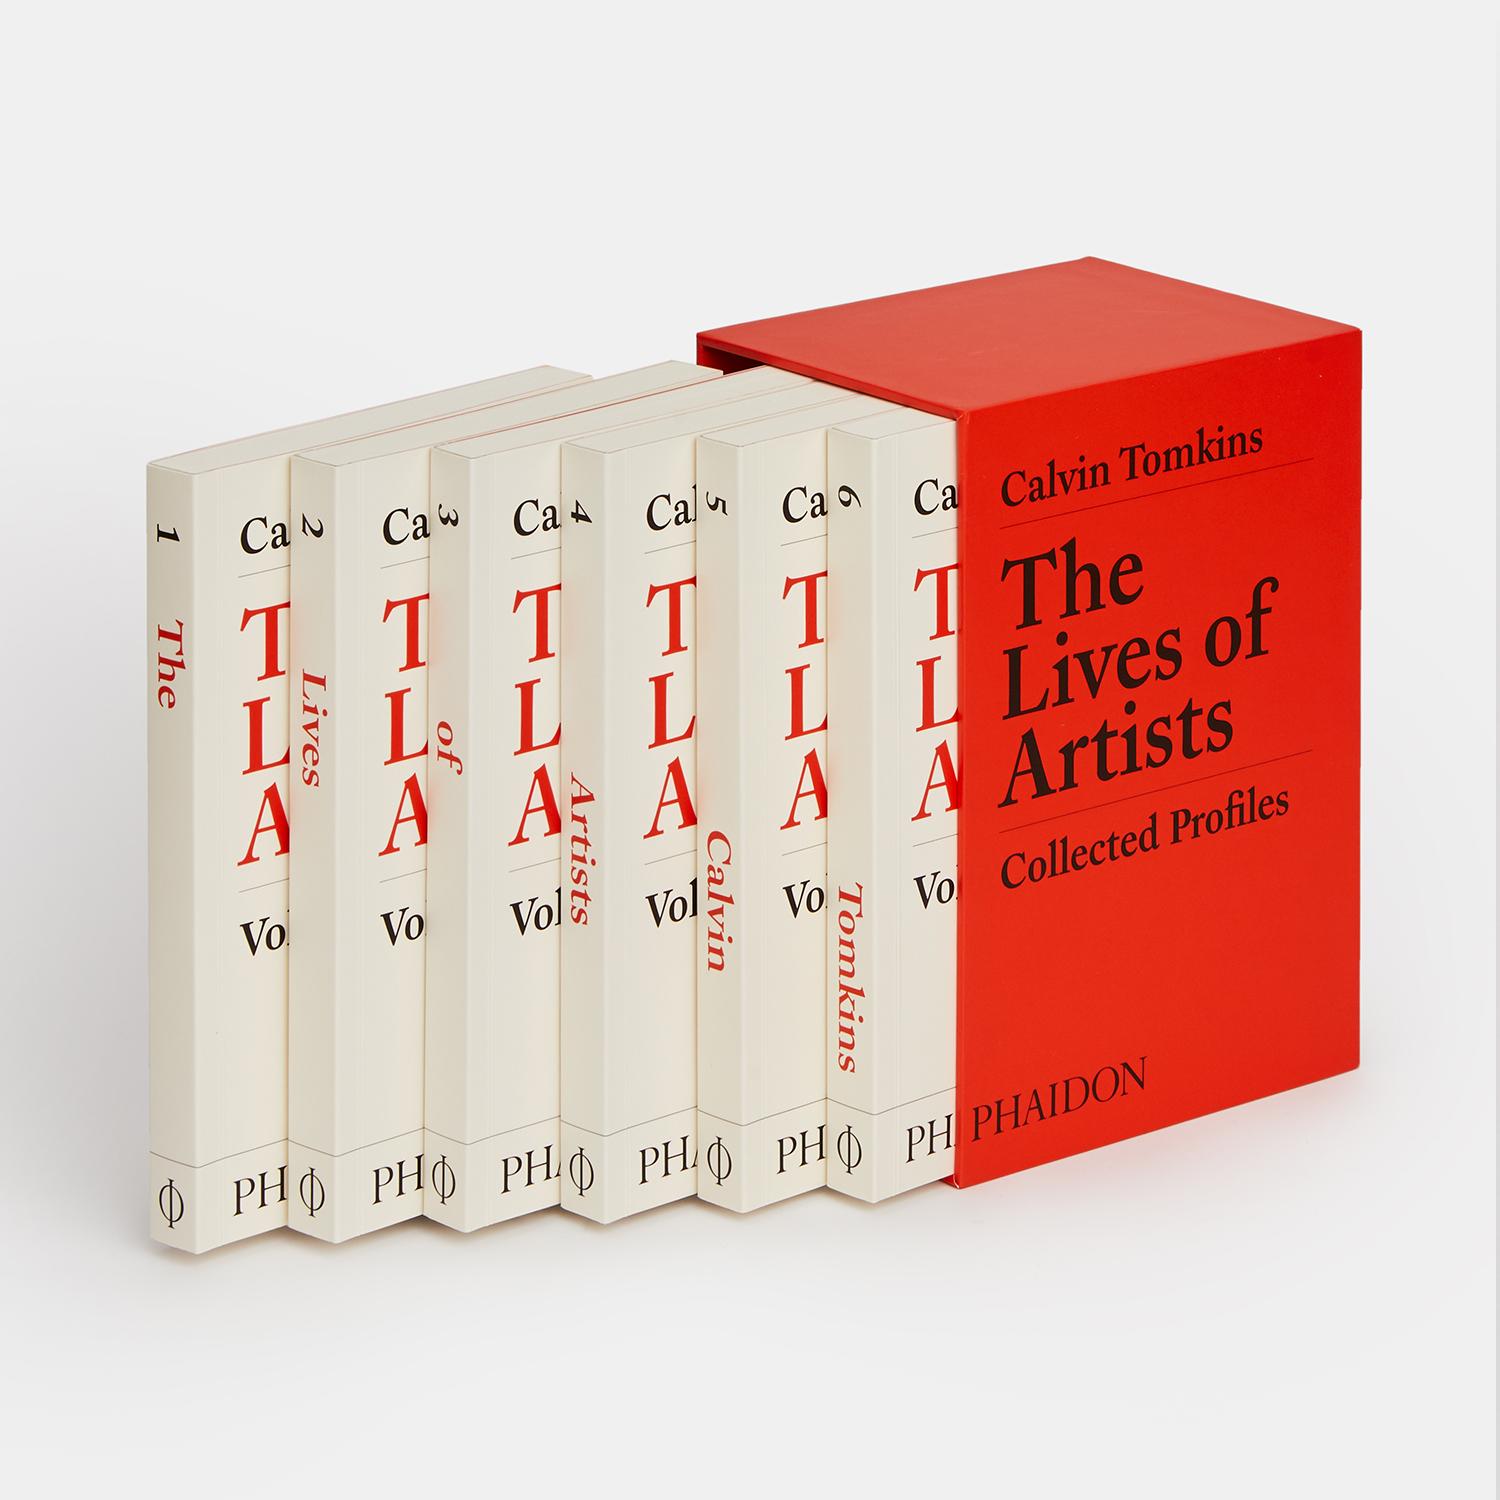 The definitive collection of artist profiles by legendary journalist and New Yorker writer Calvin Tomkins, from the 1960s to today

In 1959, Calvin Tomkins interviewed Marcel Duchamp for Newsweek, beginning his six decade- long career writing about